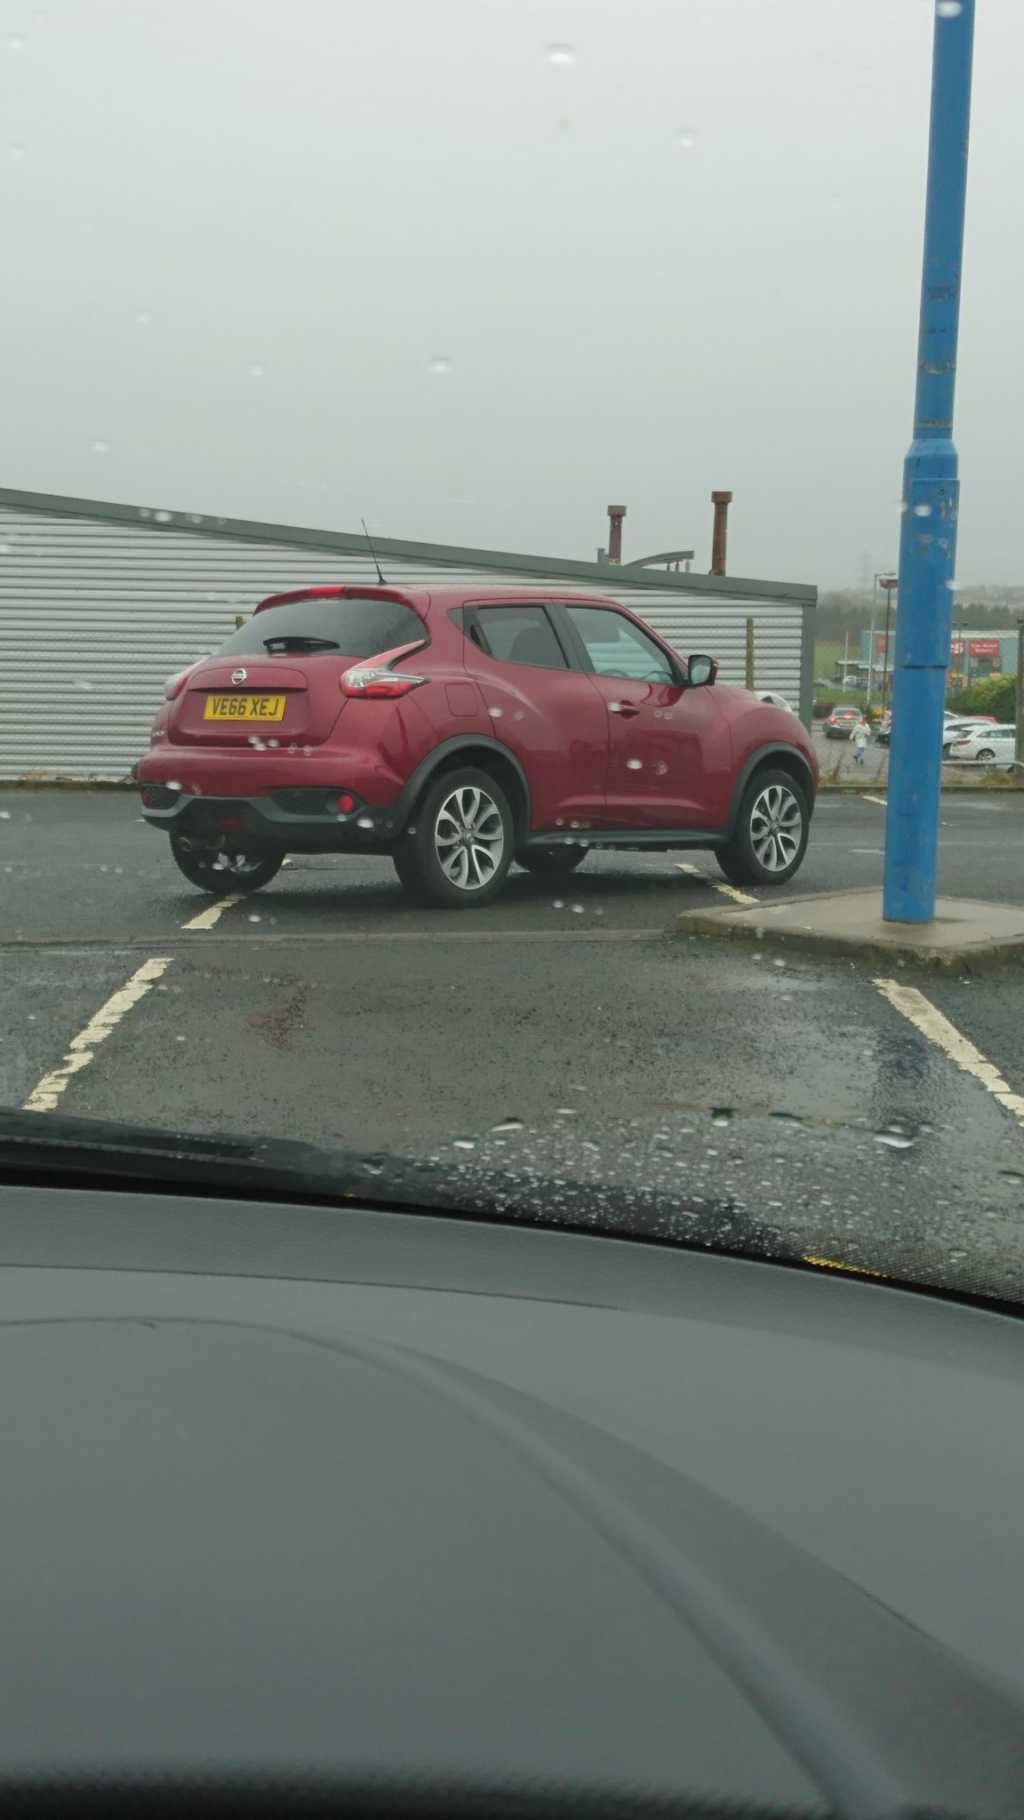 VE66 XEJ displaying Inconsiderate Parking